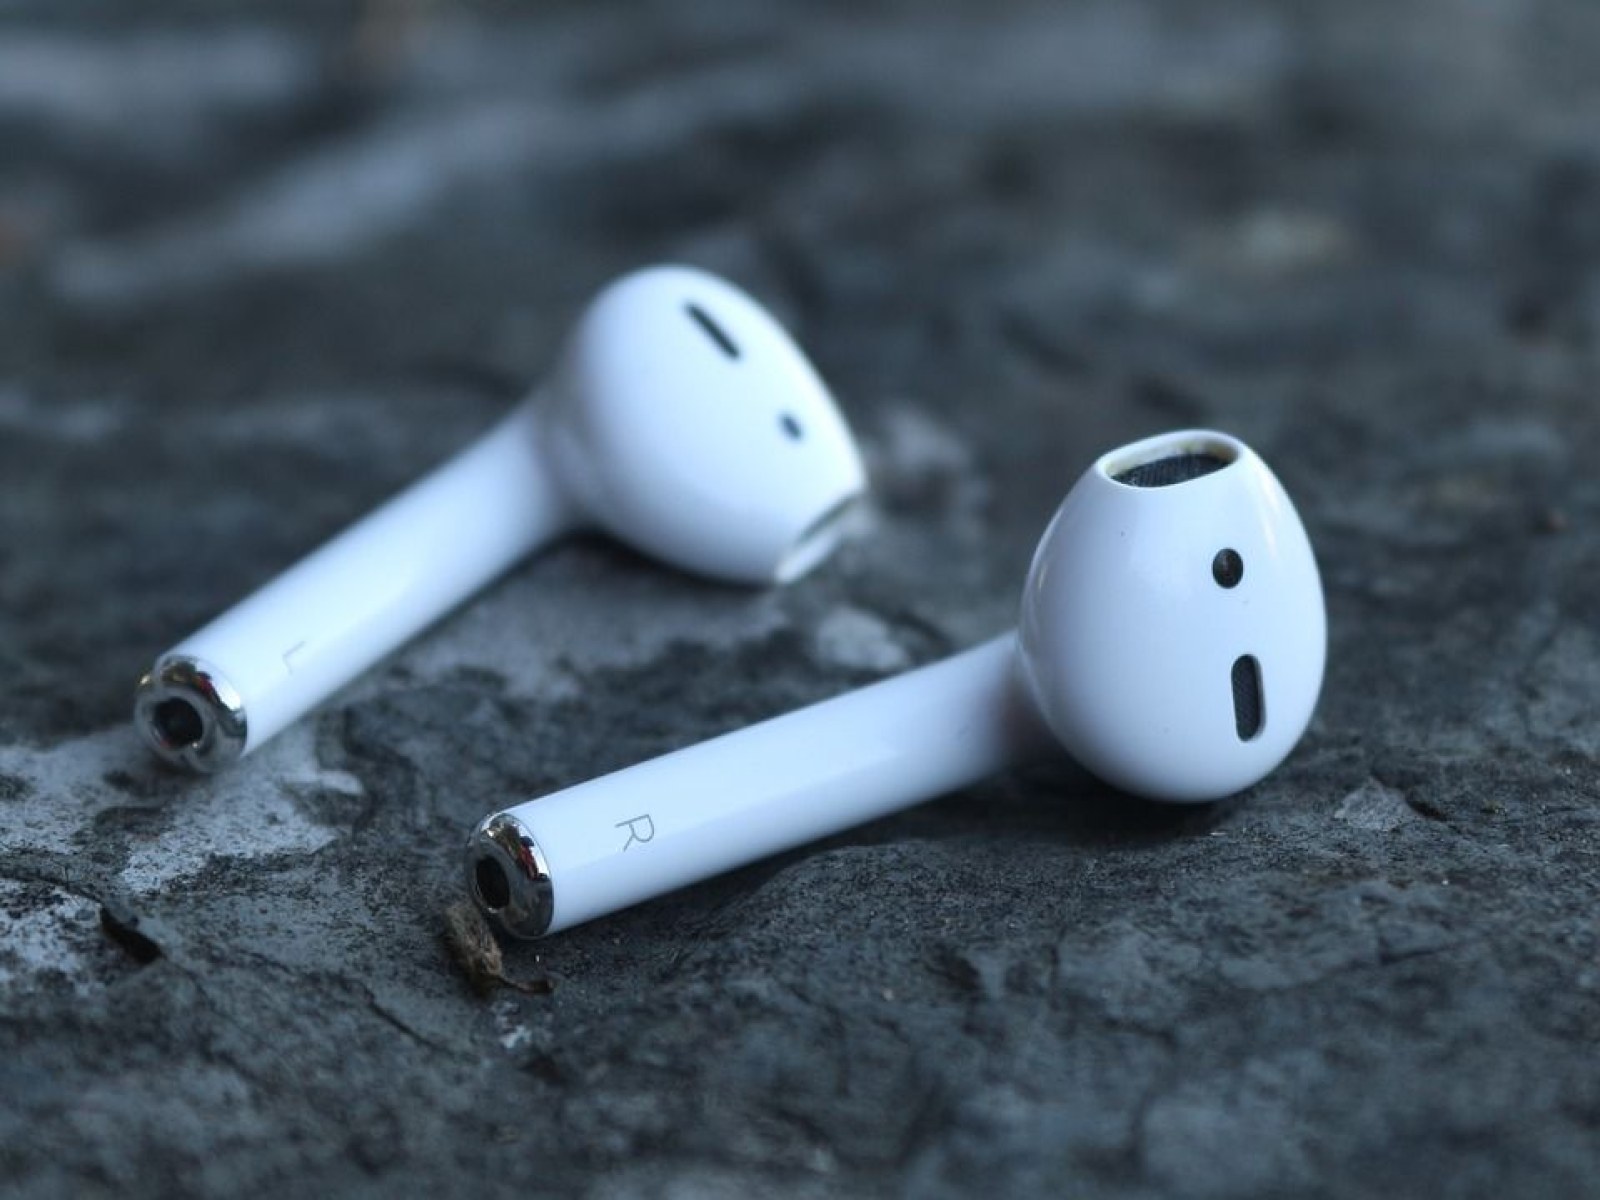 Repairman Put Glare Apple's Replacement AirPods Have Pairing Issues Due To Unreleased Firmware